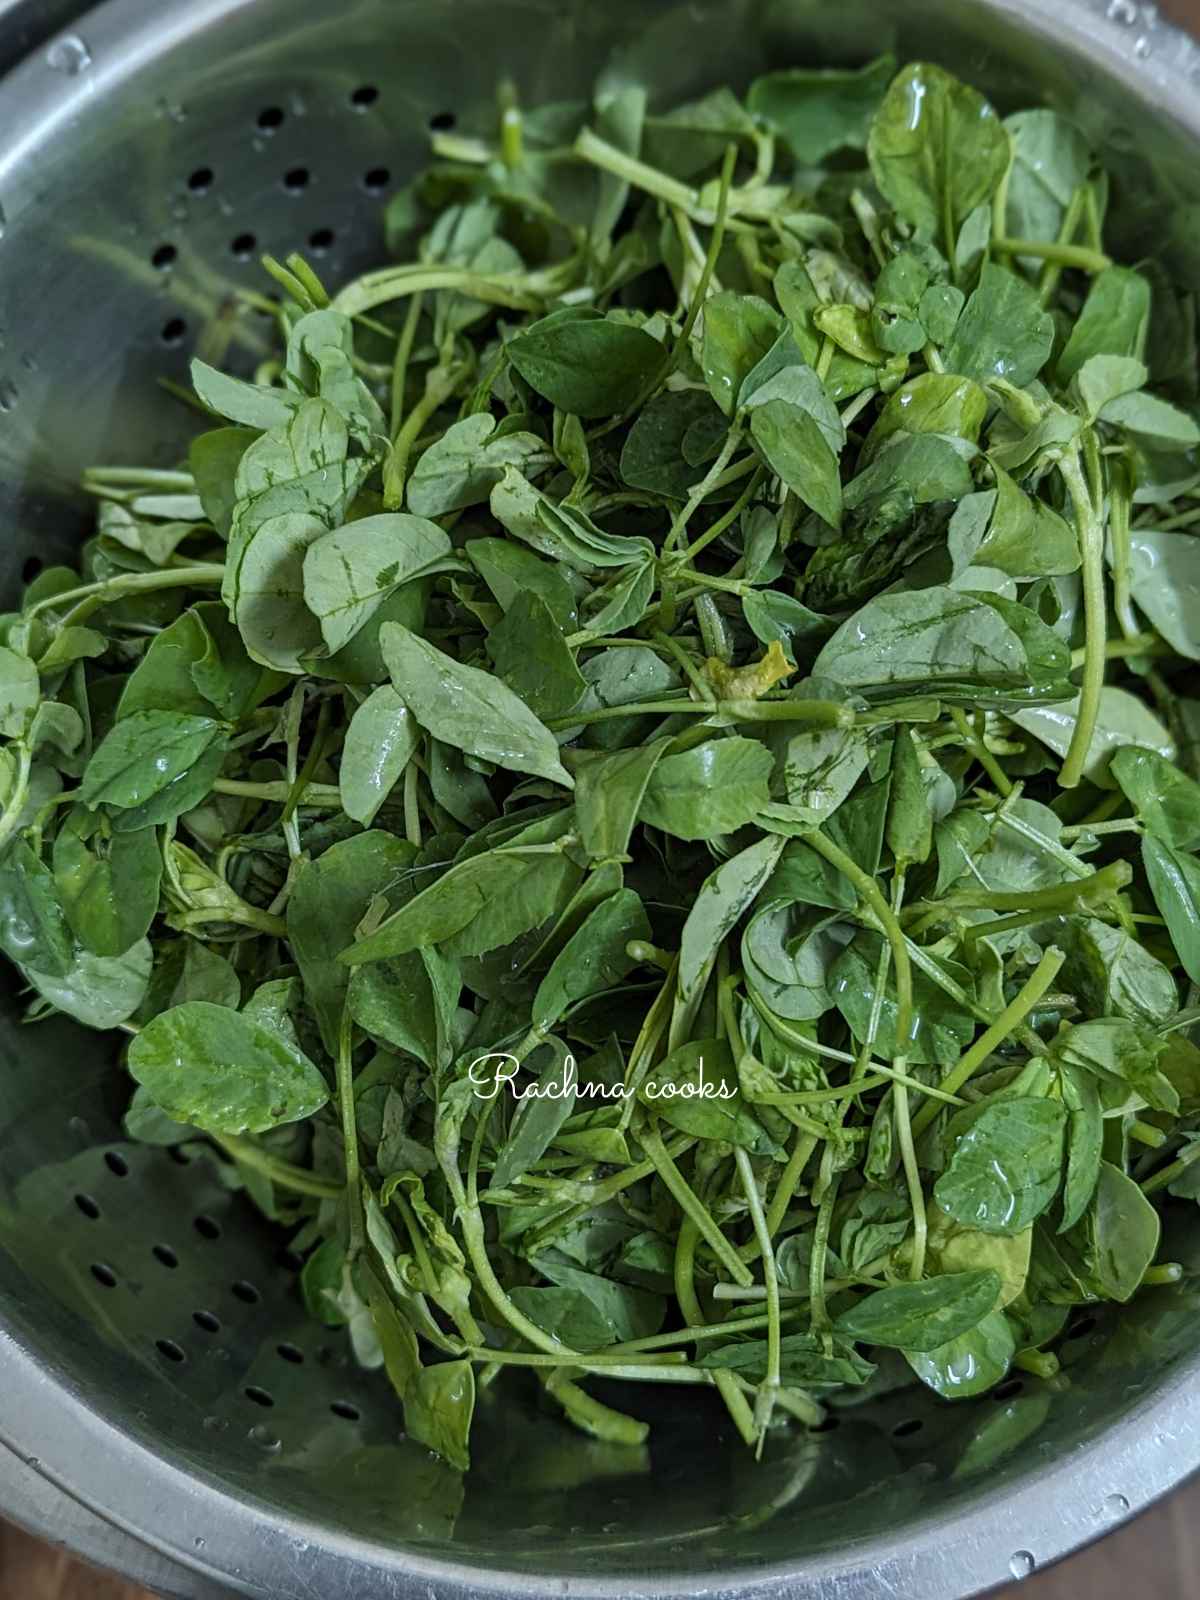 Cleaned and washed fenugreek leaves or methi.